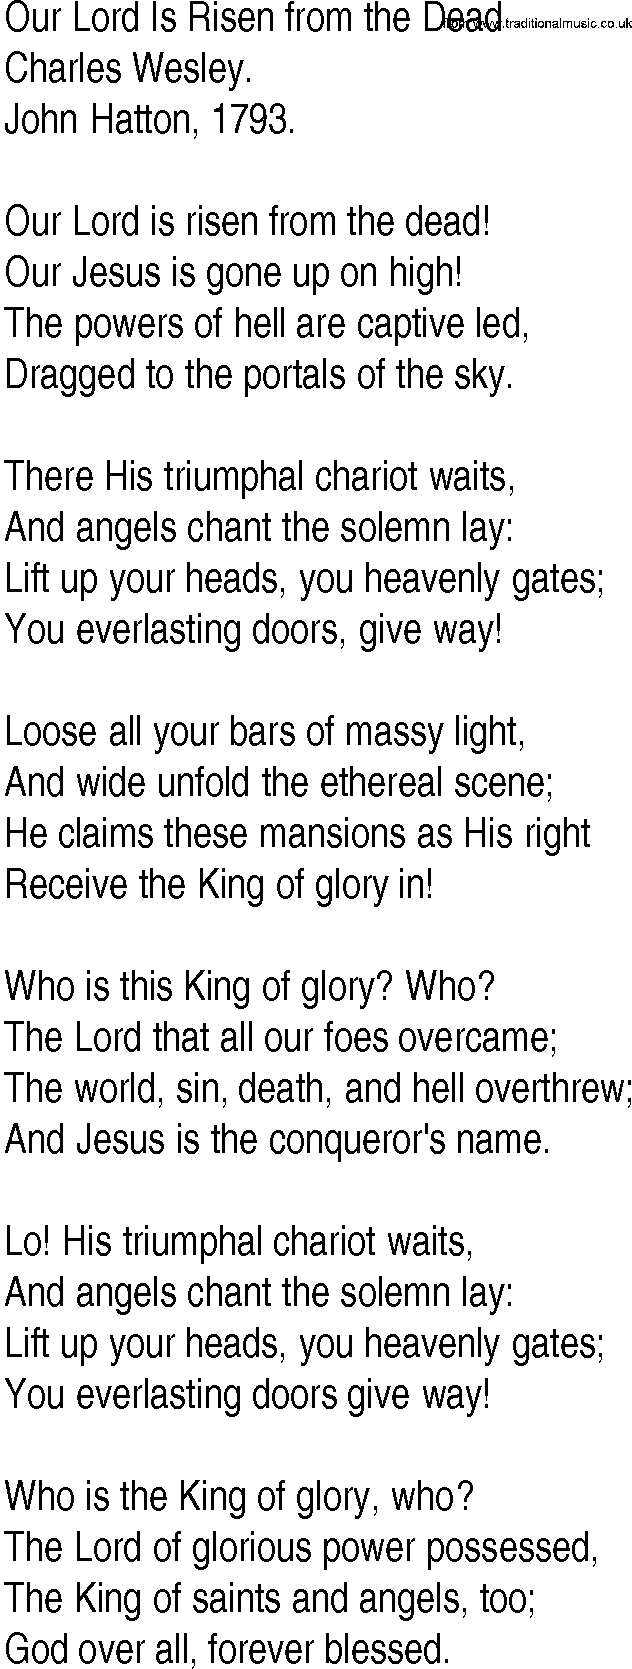 Hymn and Gospel Song: Our Lord Is Risen from the Dead by Charles Wesley lyrics